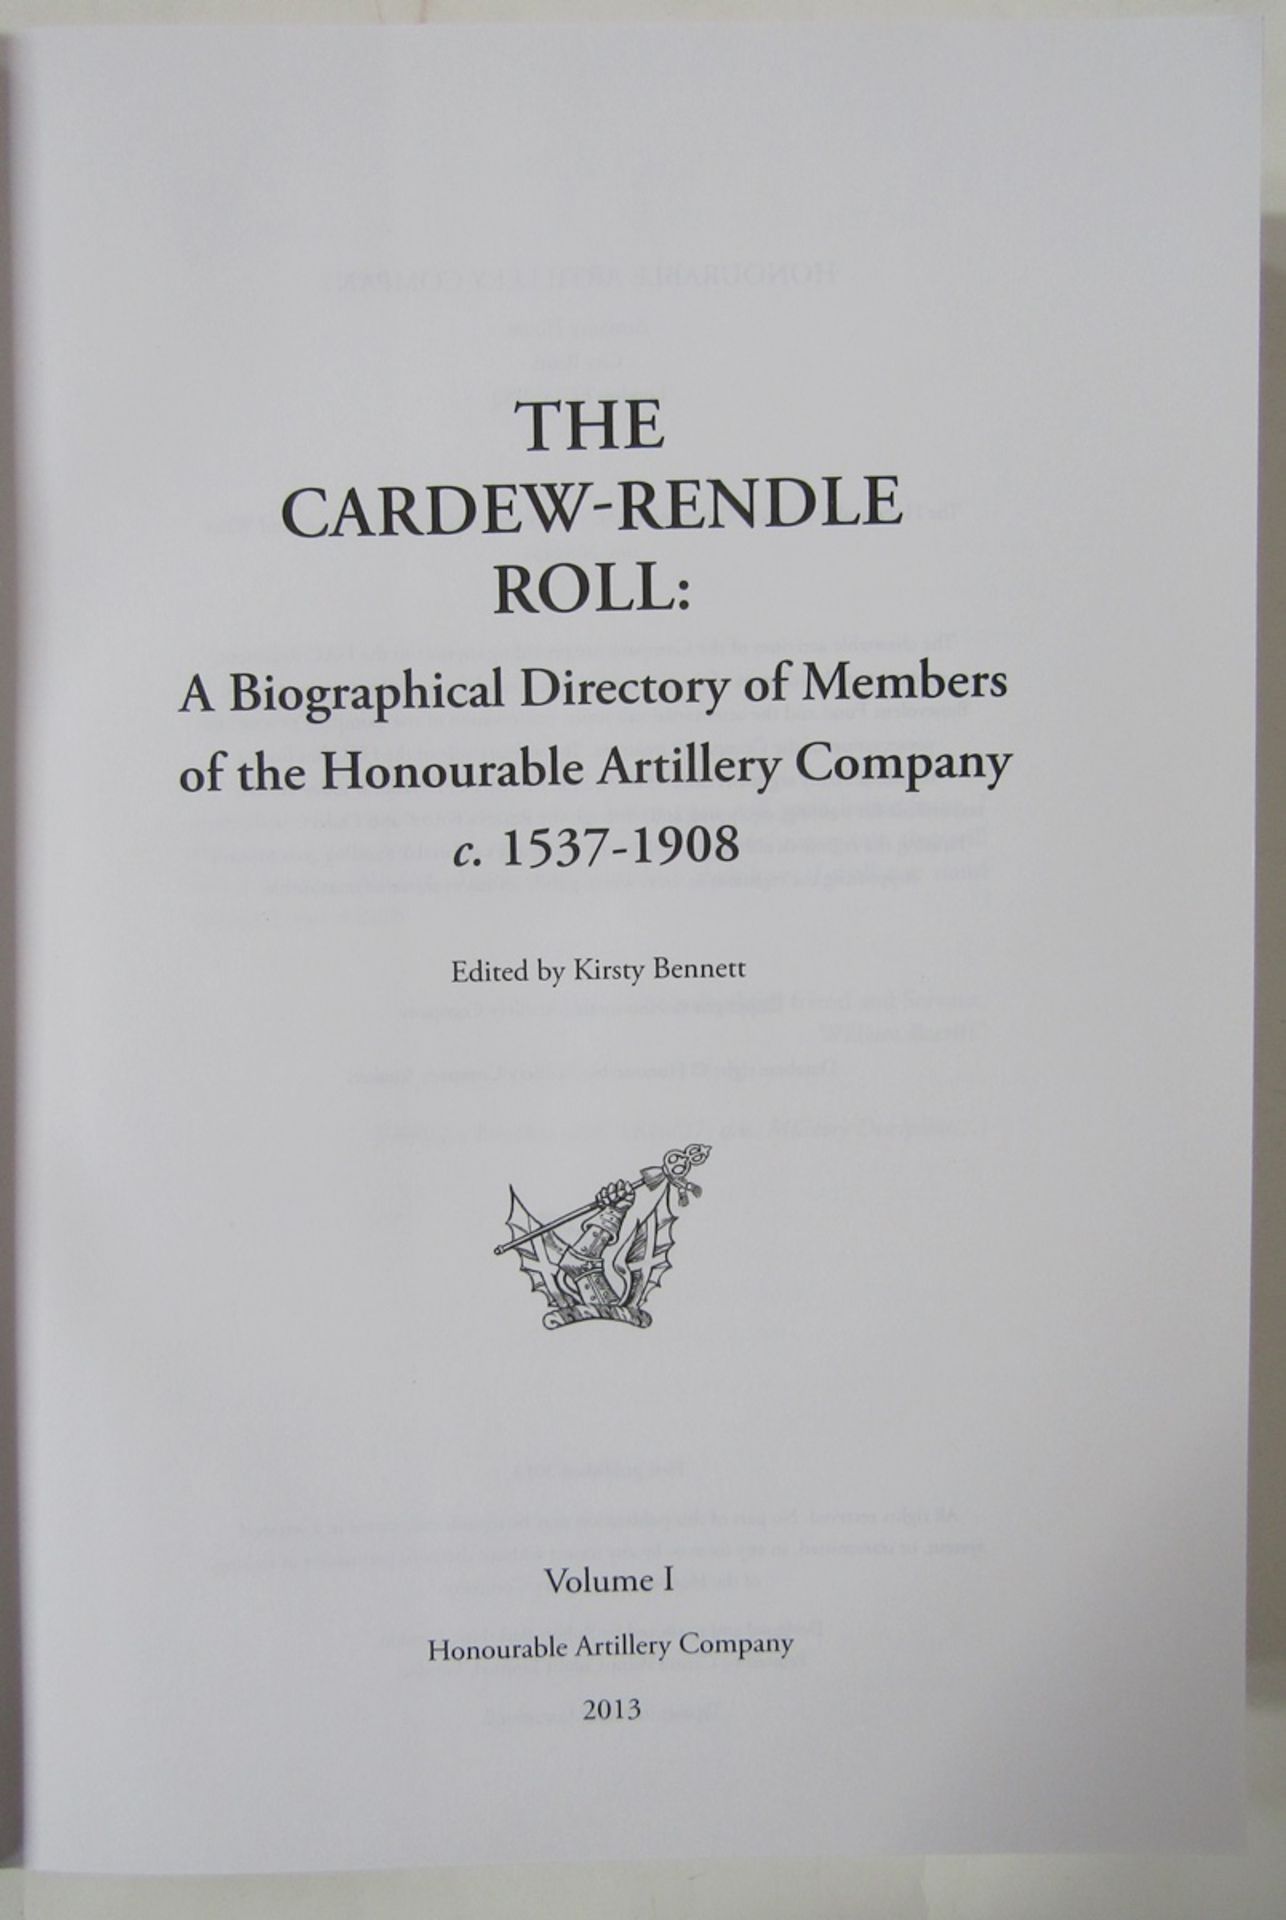 Bennett, Kirsty "The Cardew-Rendle Roll: A Biographical Directory of The Honourable Artillery - Image 3 of 23